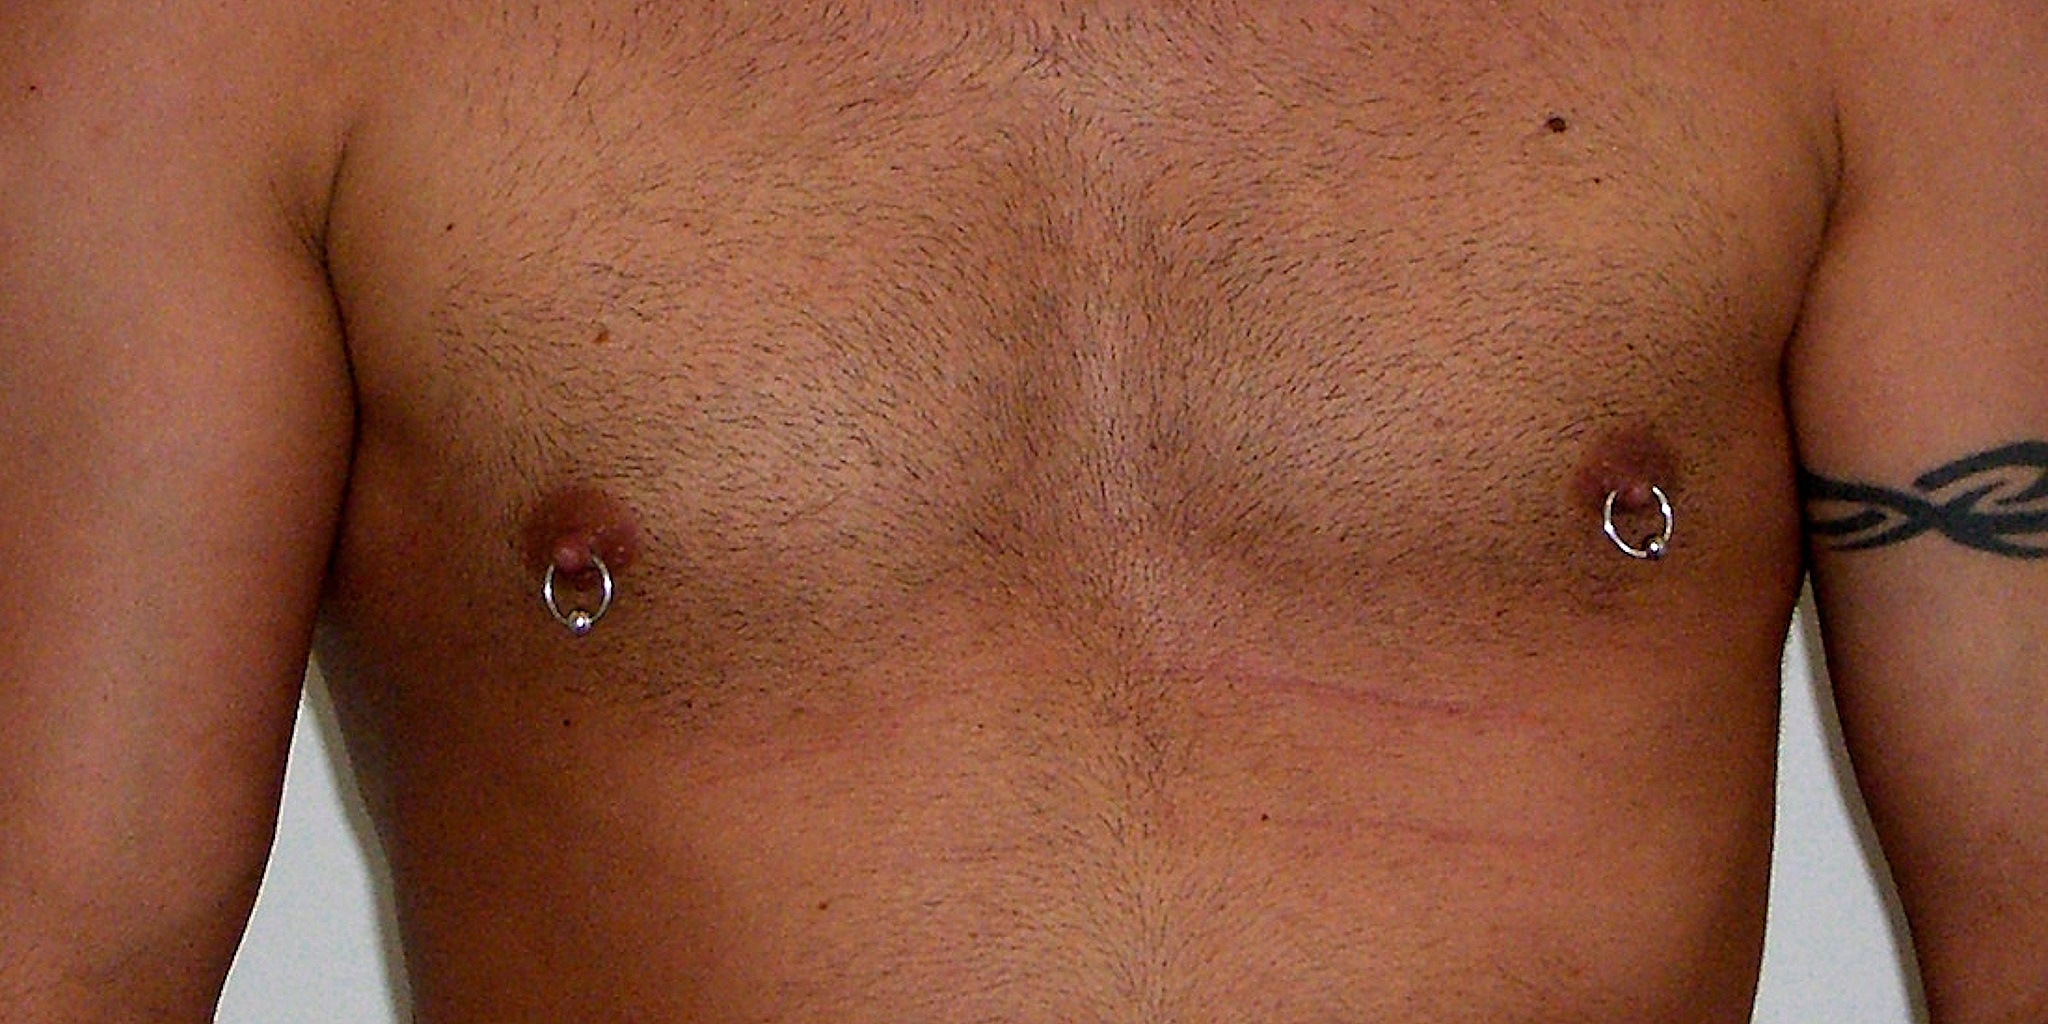 The check of a man with a nipple piercing on each of his nipples.